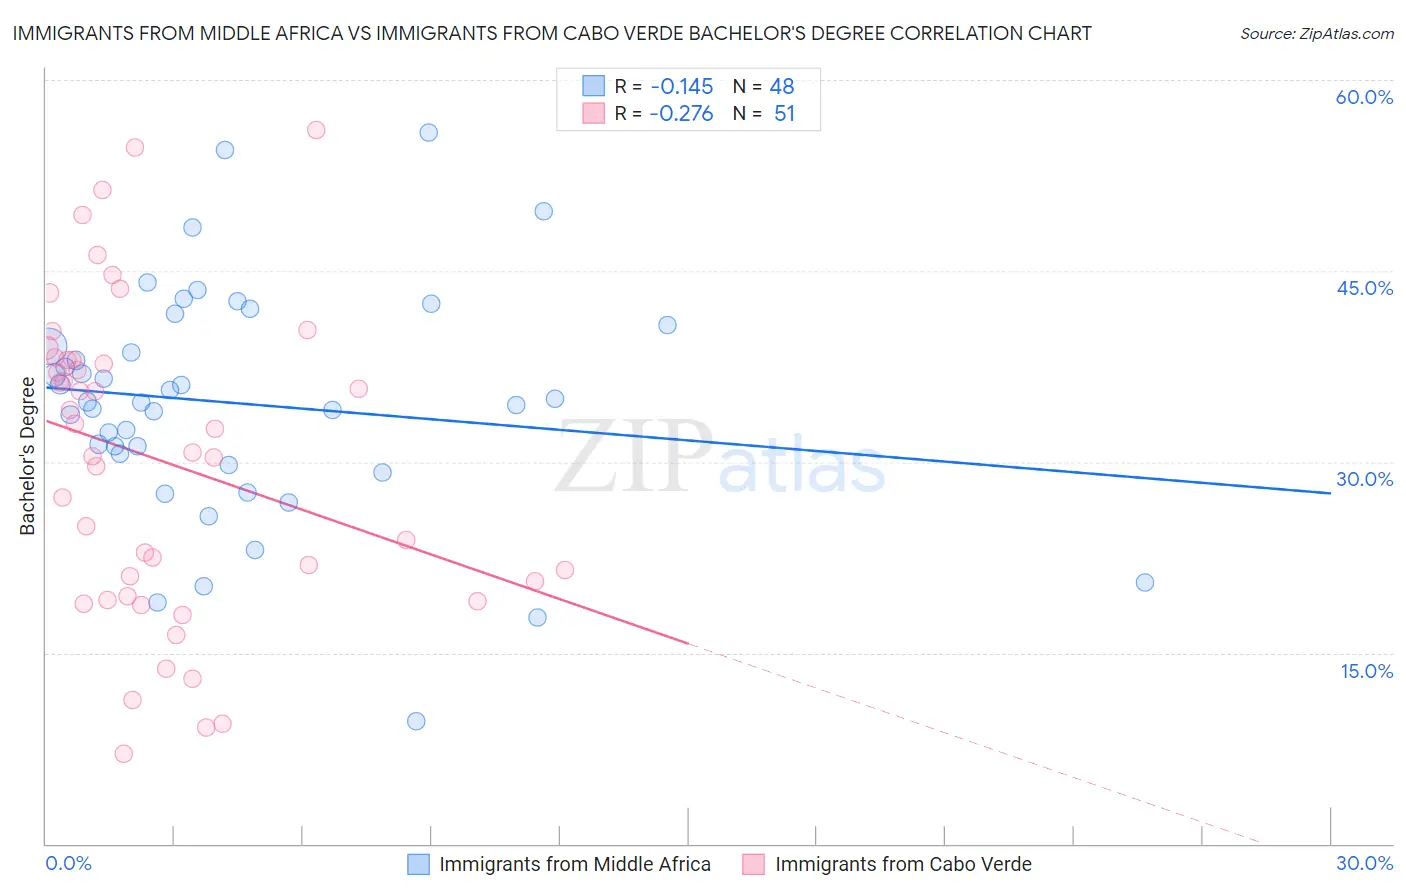 Immigrants from Middle Africa vs Immigrants from Cabo Verde Bachelor's Degree